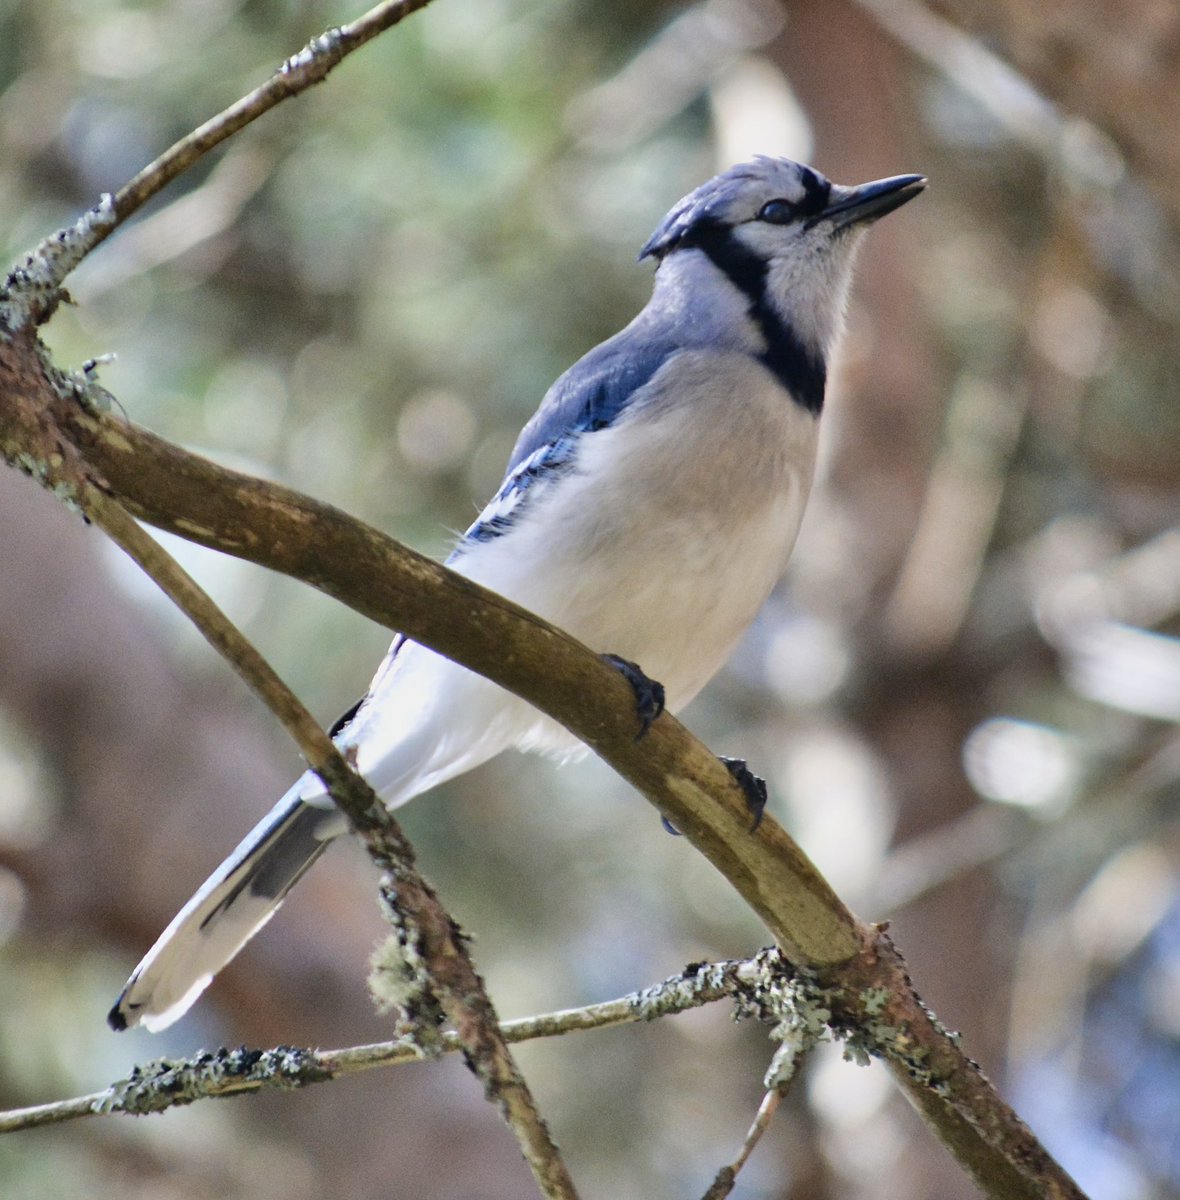 A beautiful blue jay in a pine tree in the afternoon sunshine. #nature #birds #ThePhotoHour #GoJaysGo